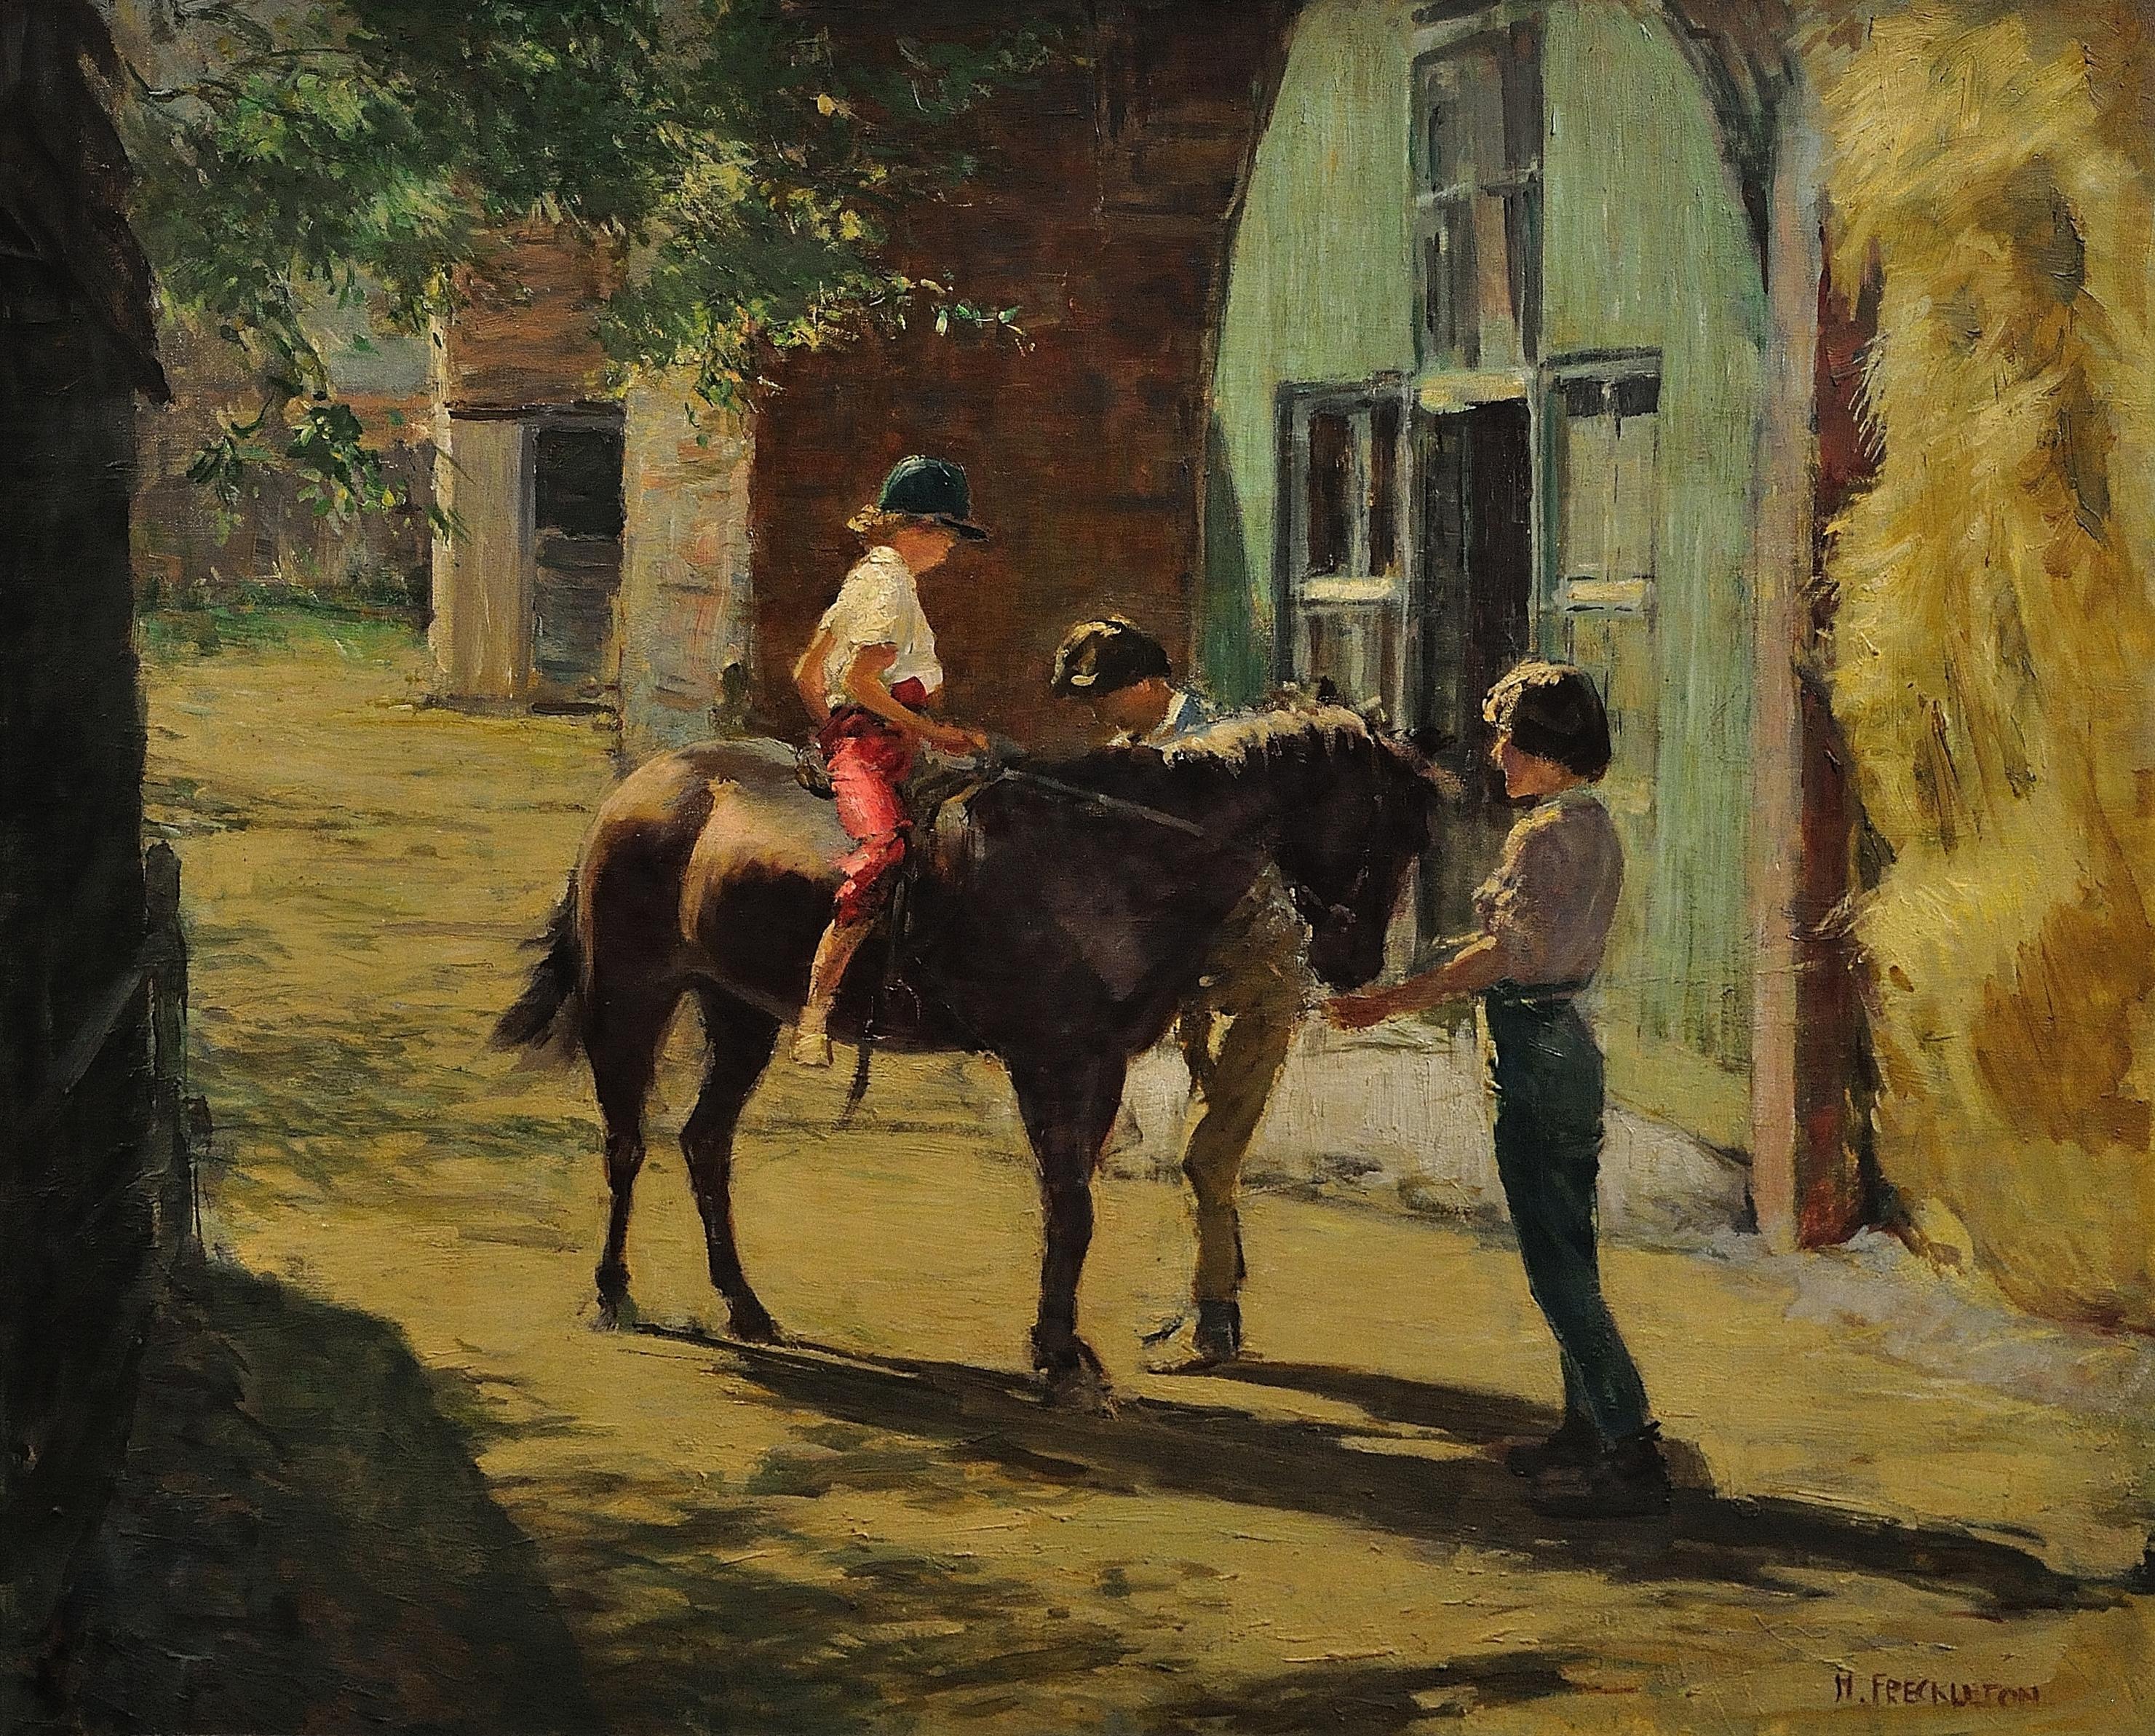 Milly with Minstrel. Children with their Pony in Dappled Summer Sunlight.